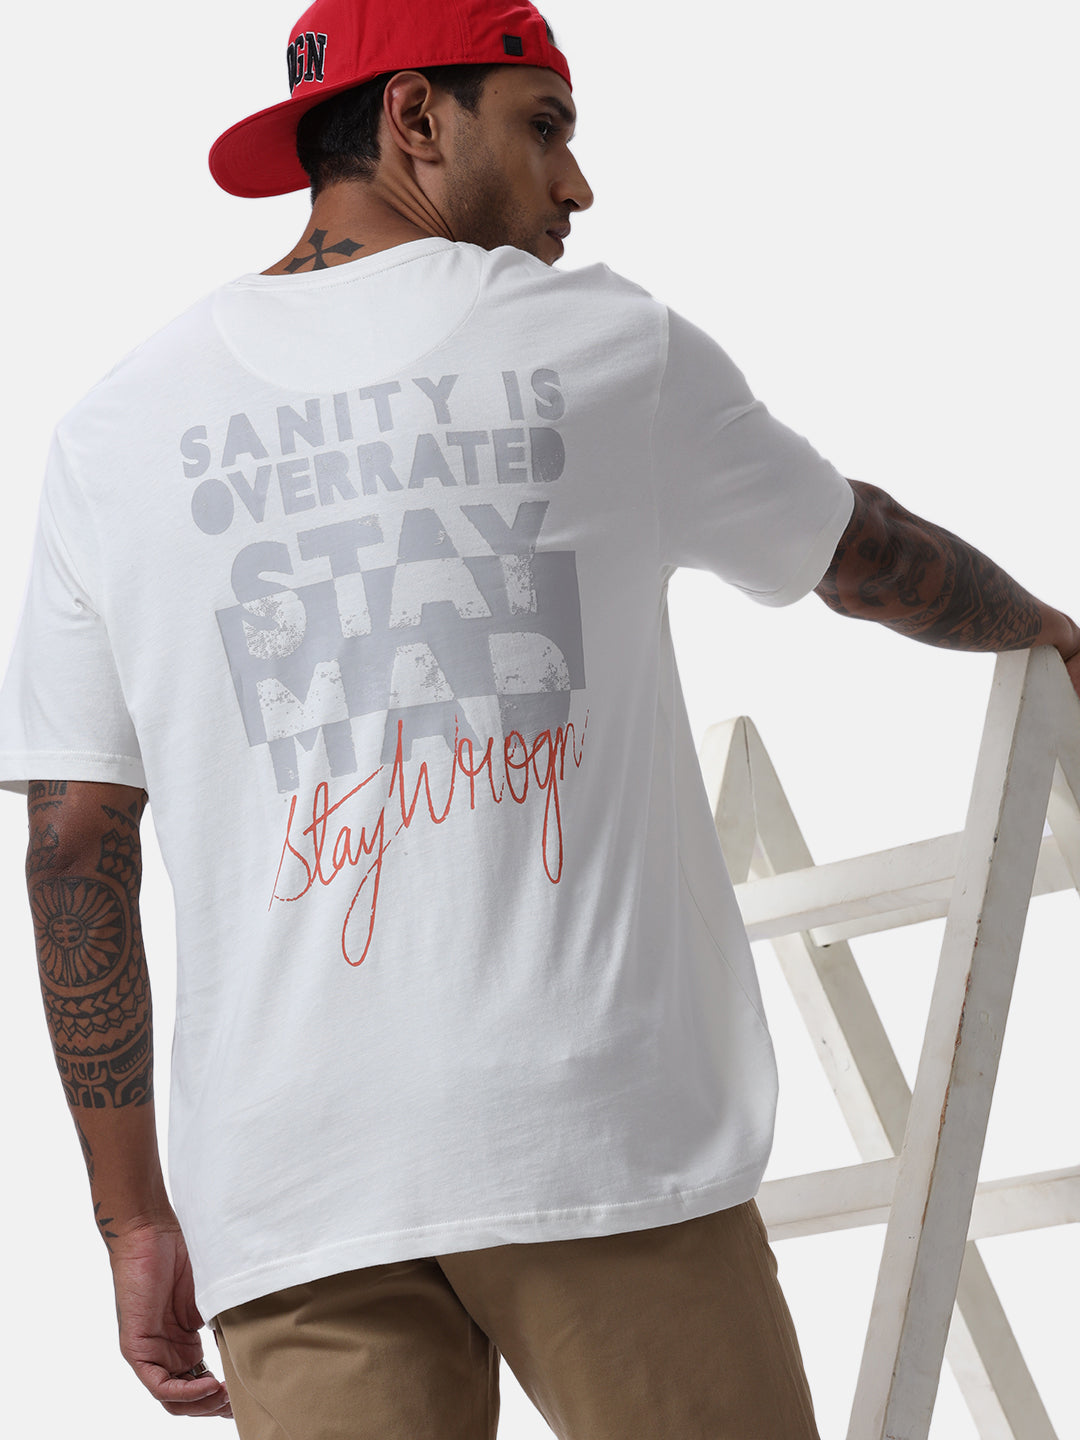 Sanity Is Overrated Printed T-Shirt